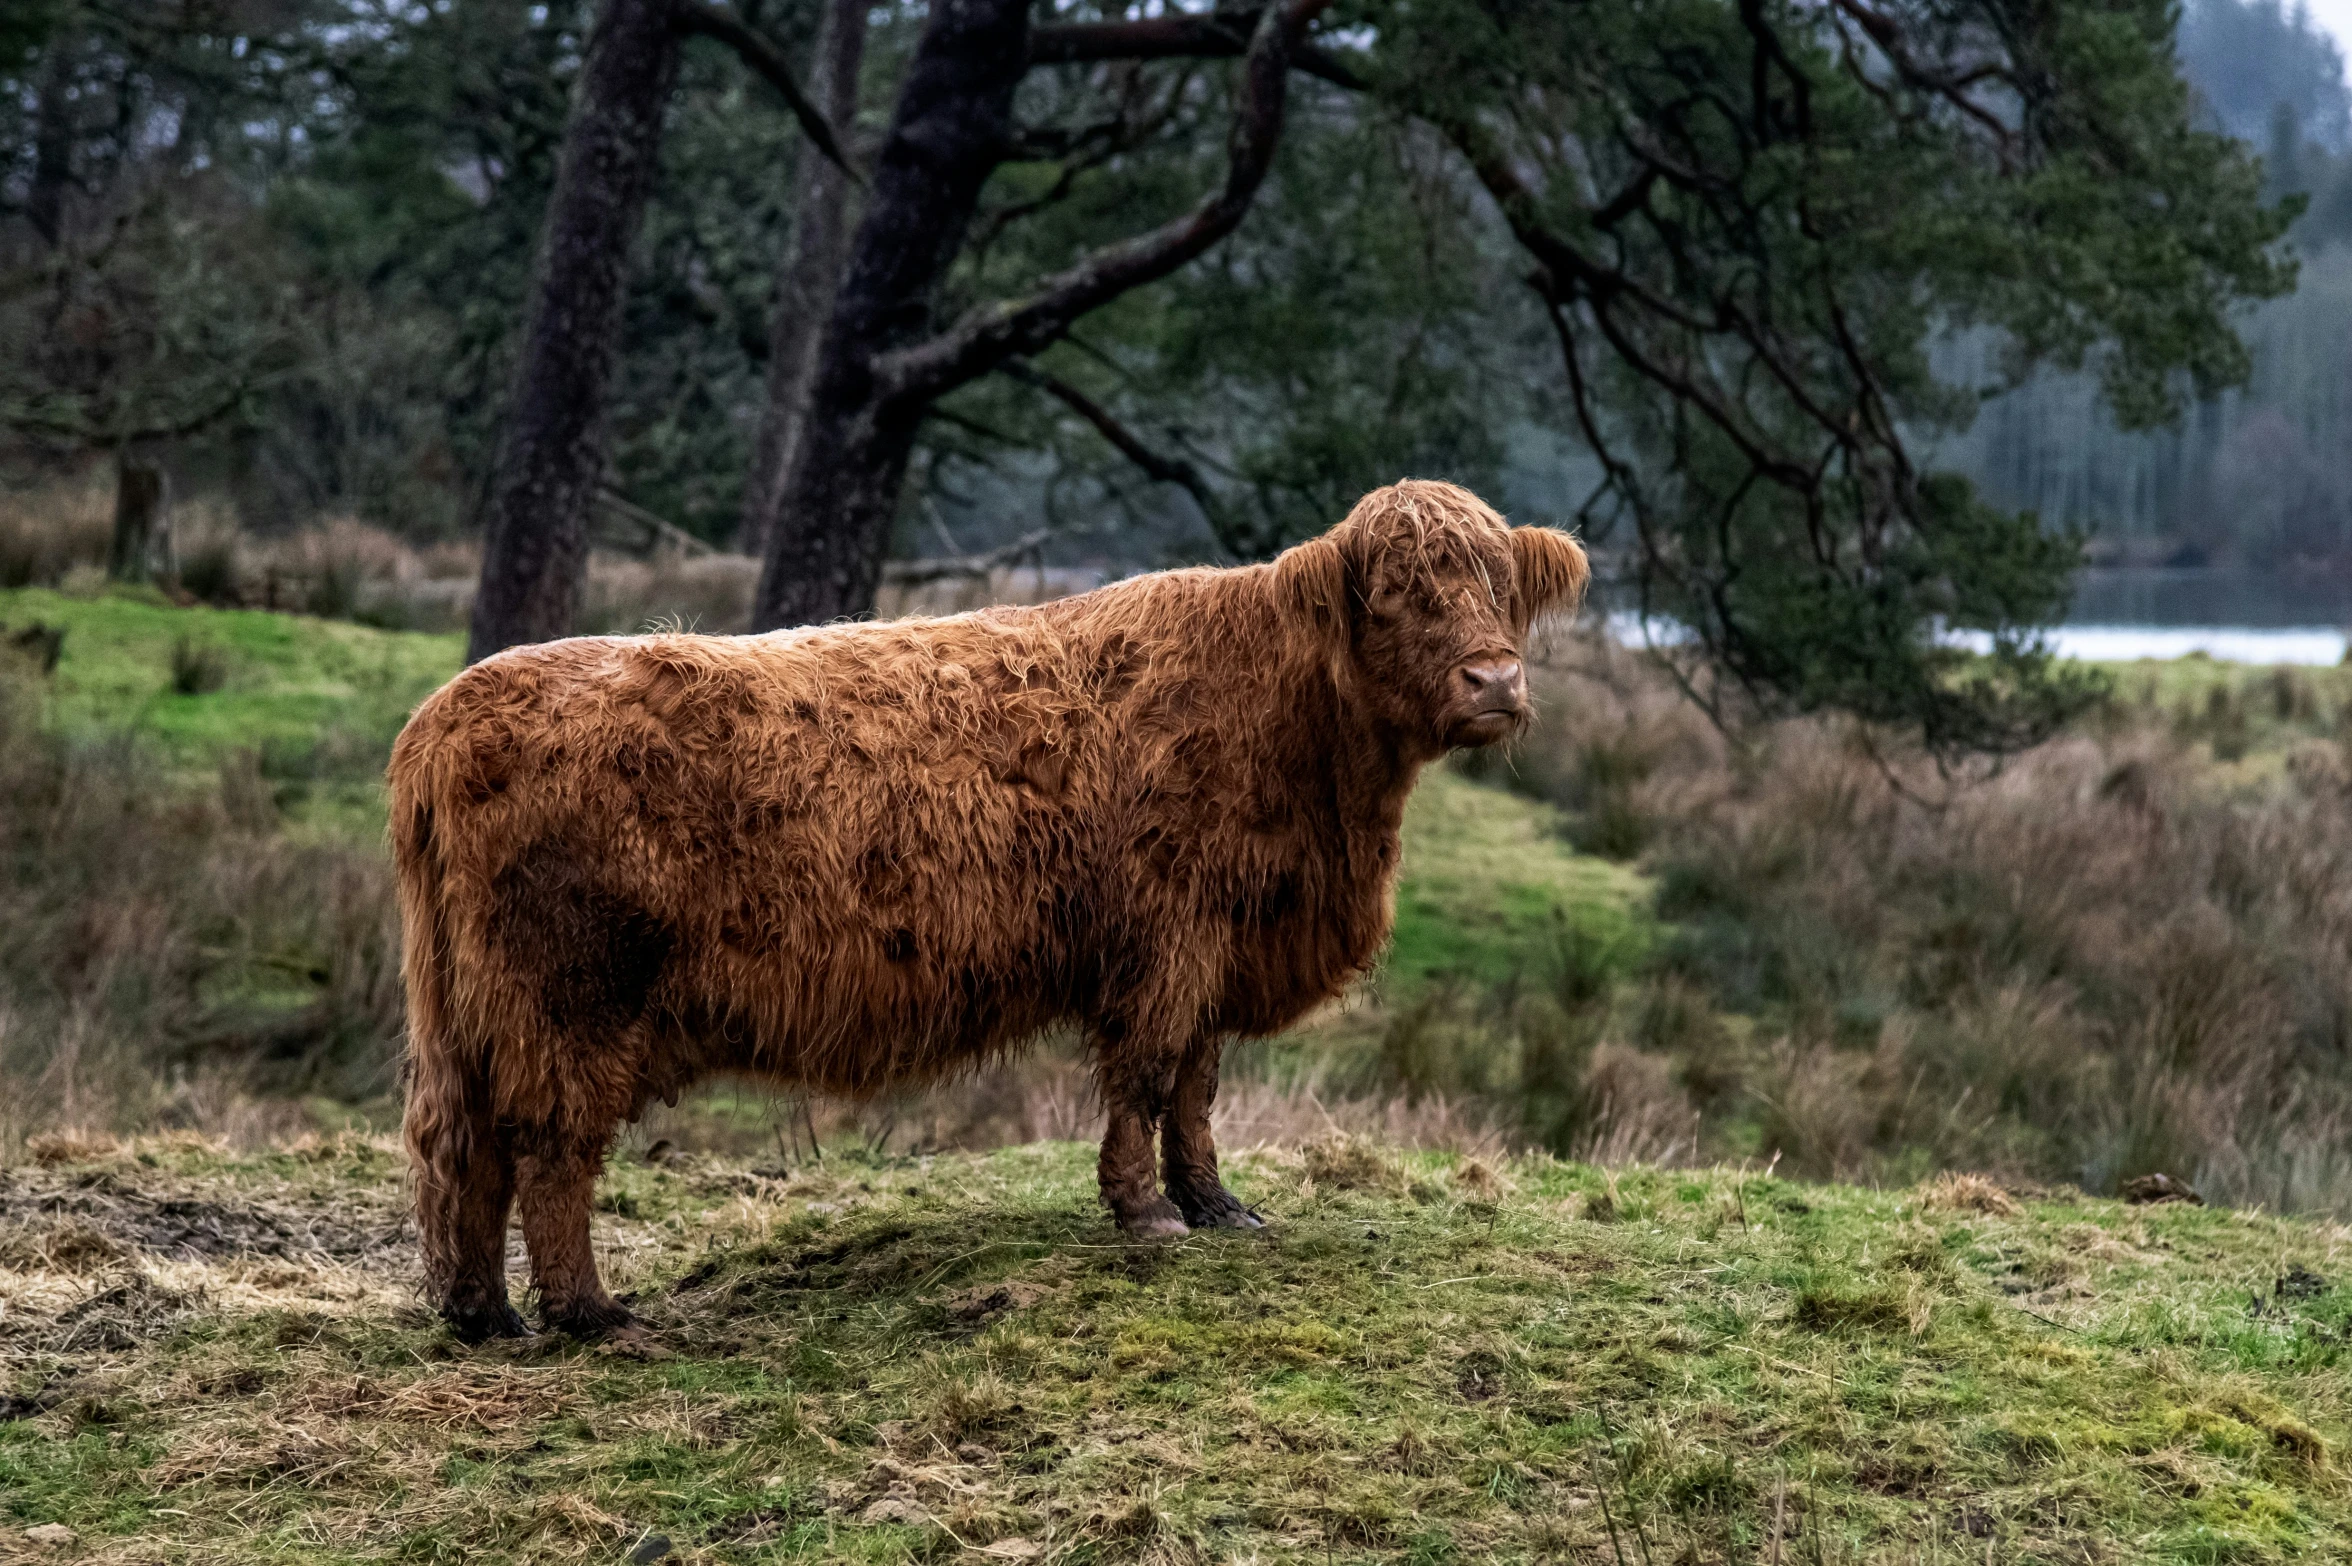 the long haired cow is standing in the grass